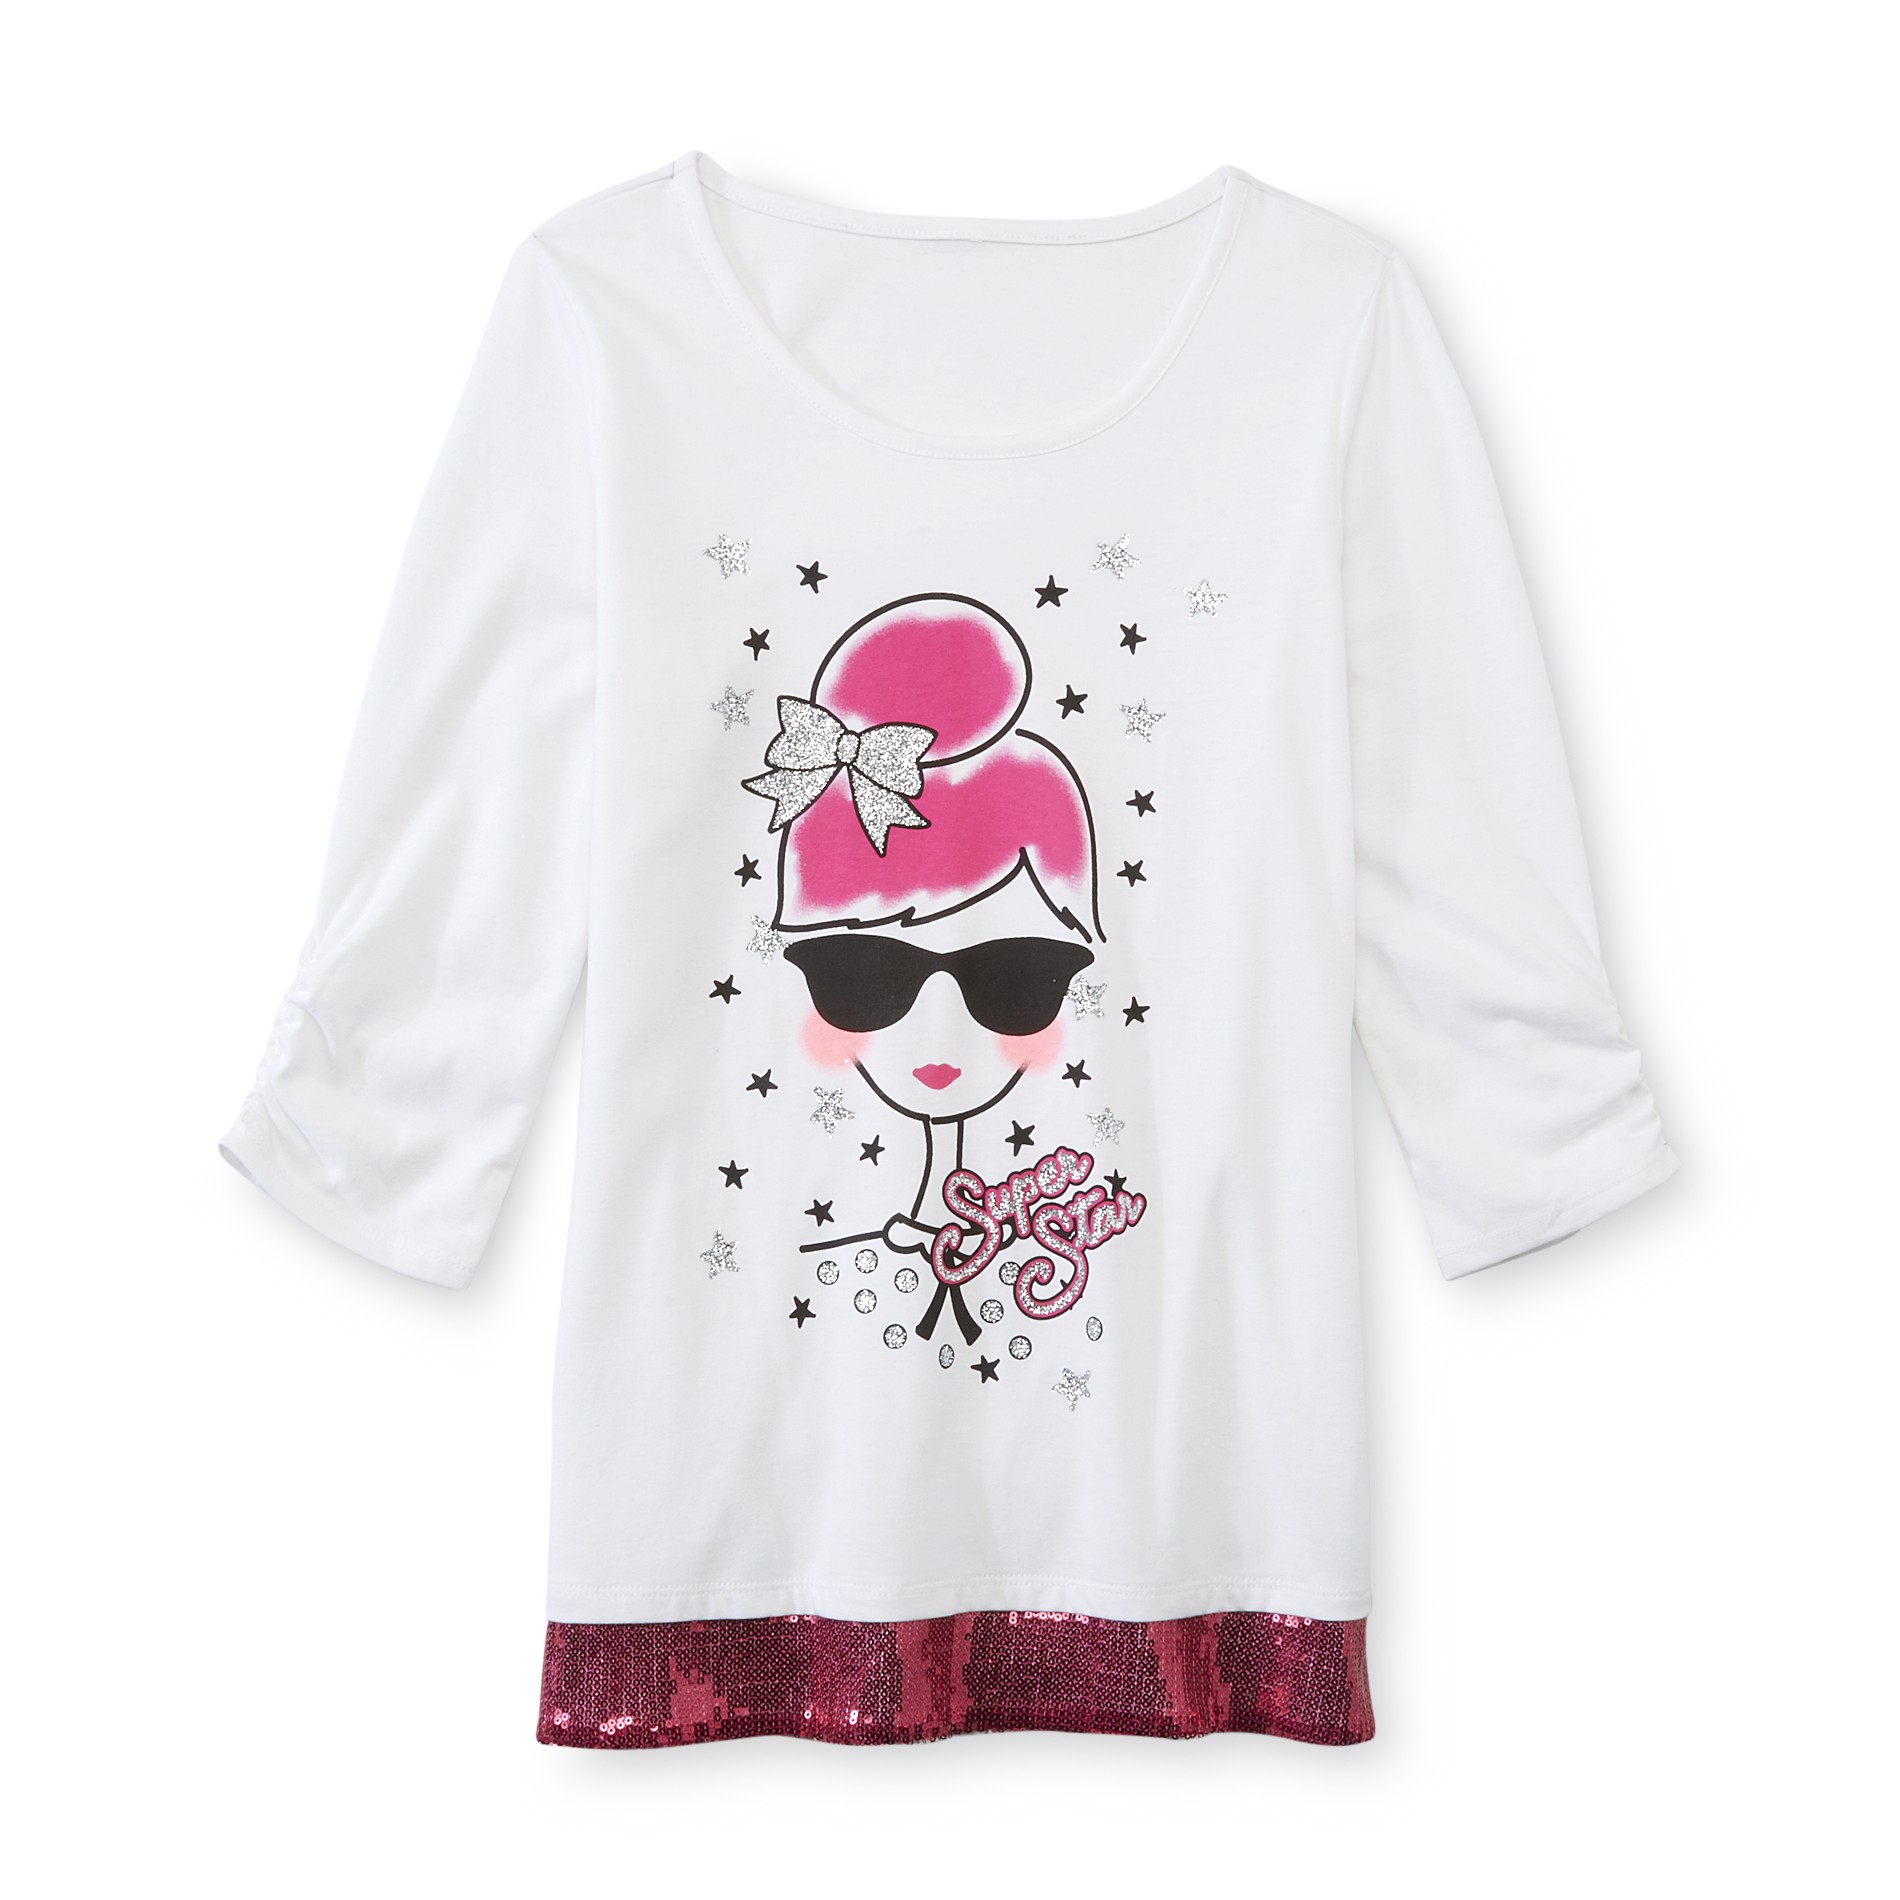 Canyon River Blues Girl's Graphic Top - Super Star